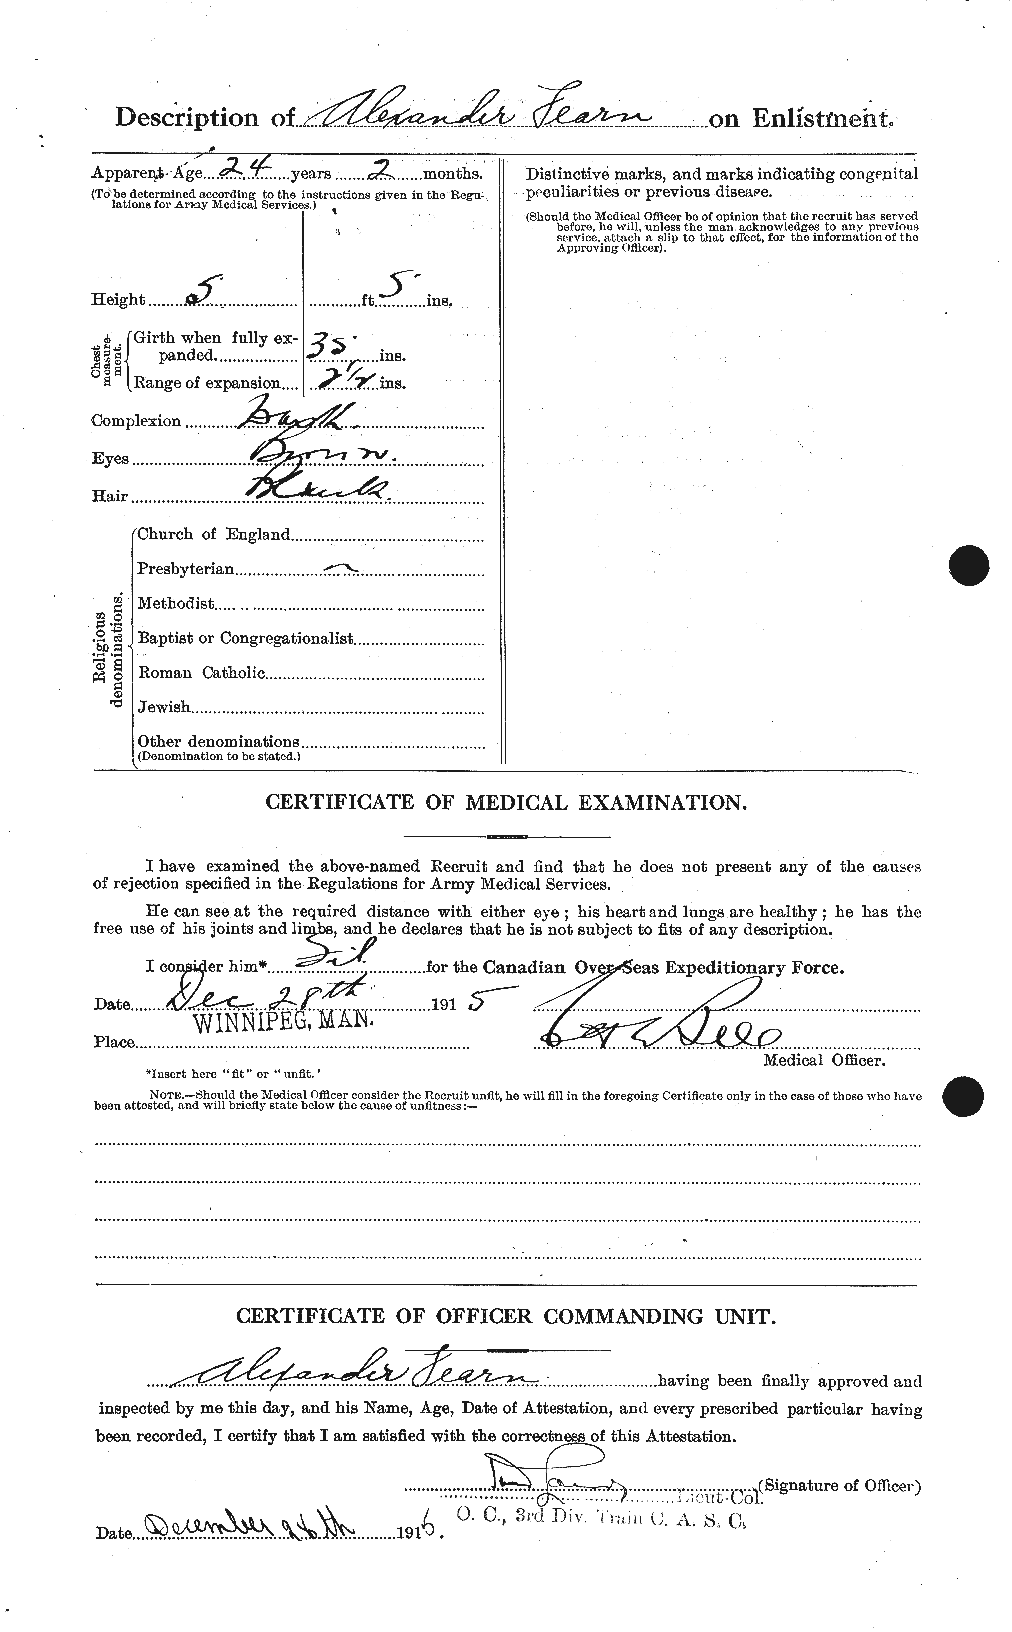 Personnel Records of the First World War - CEF 319563b